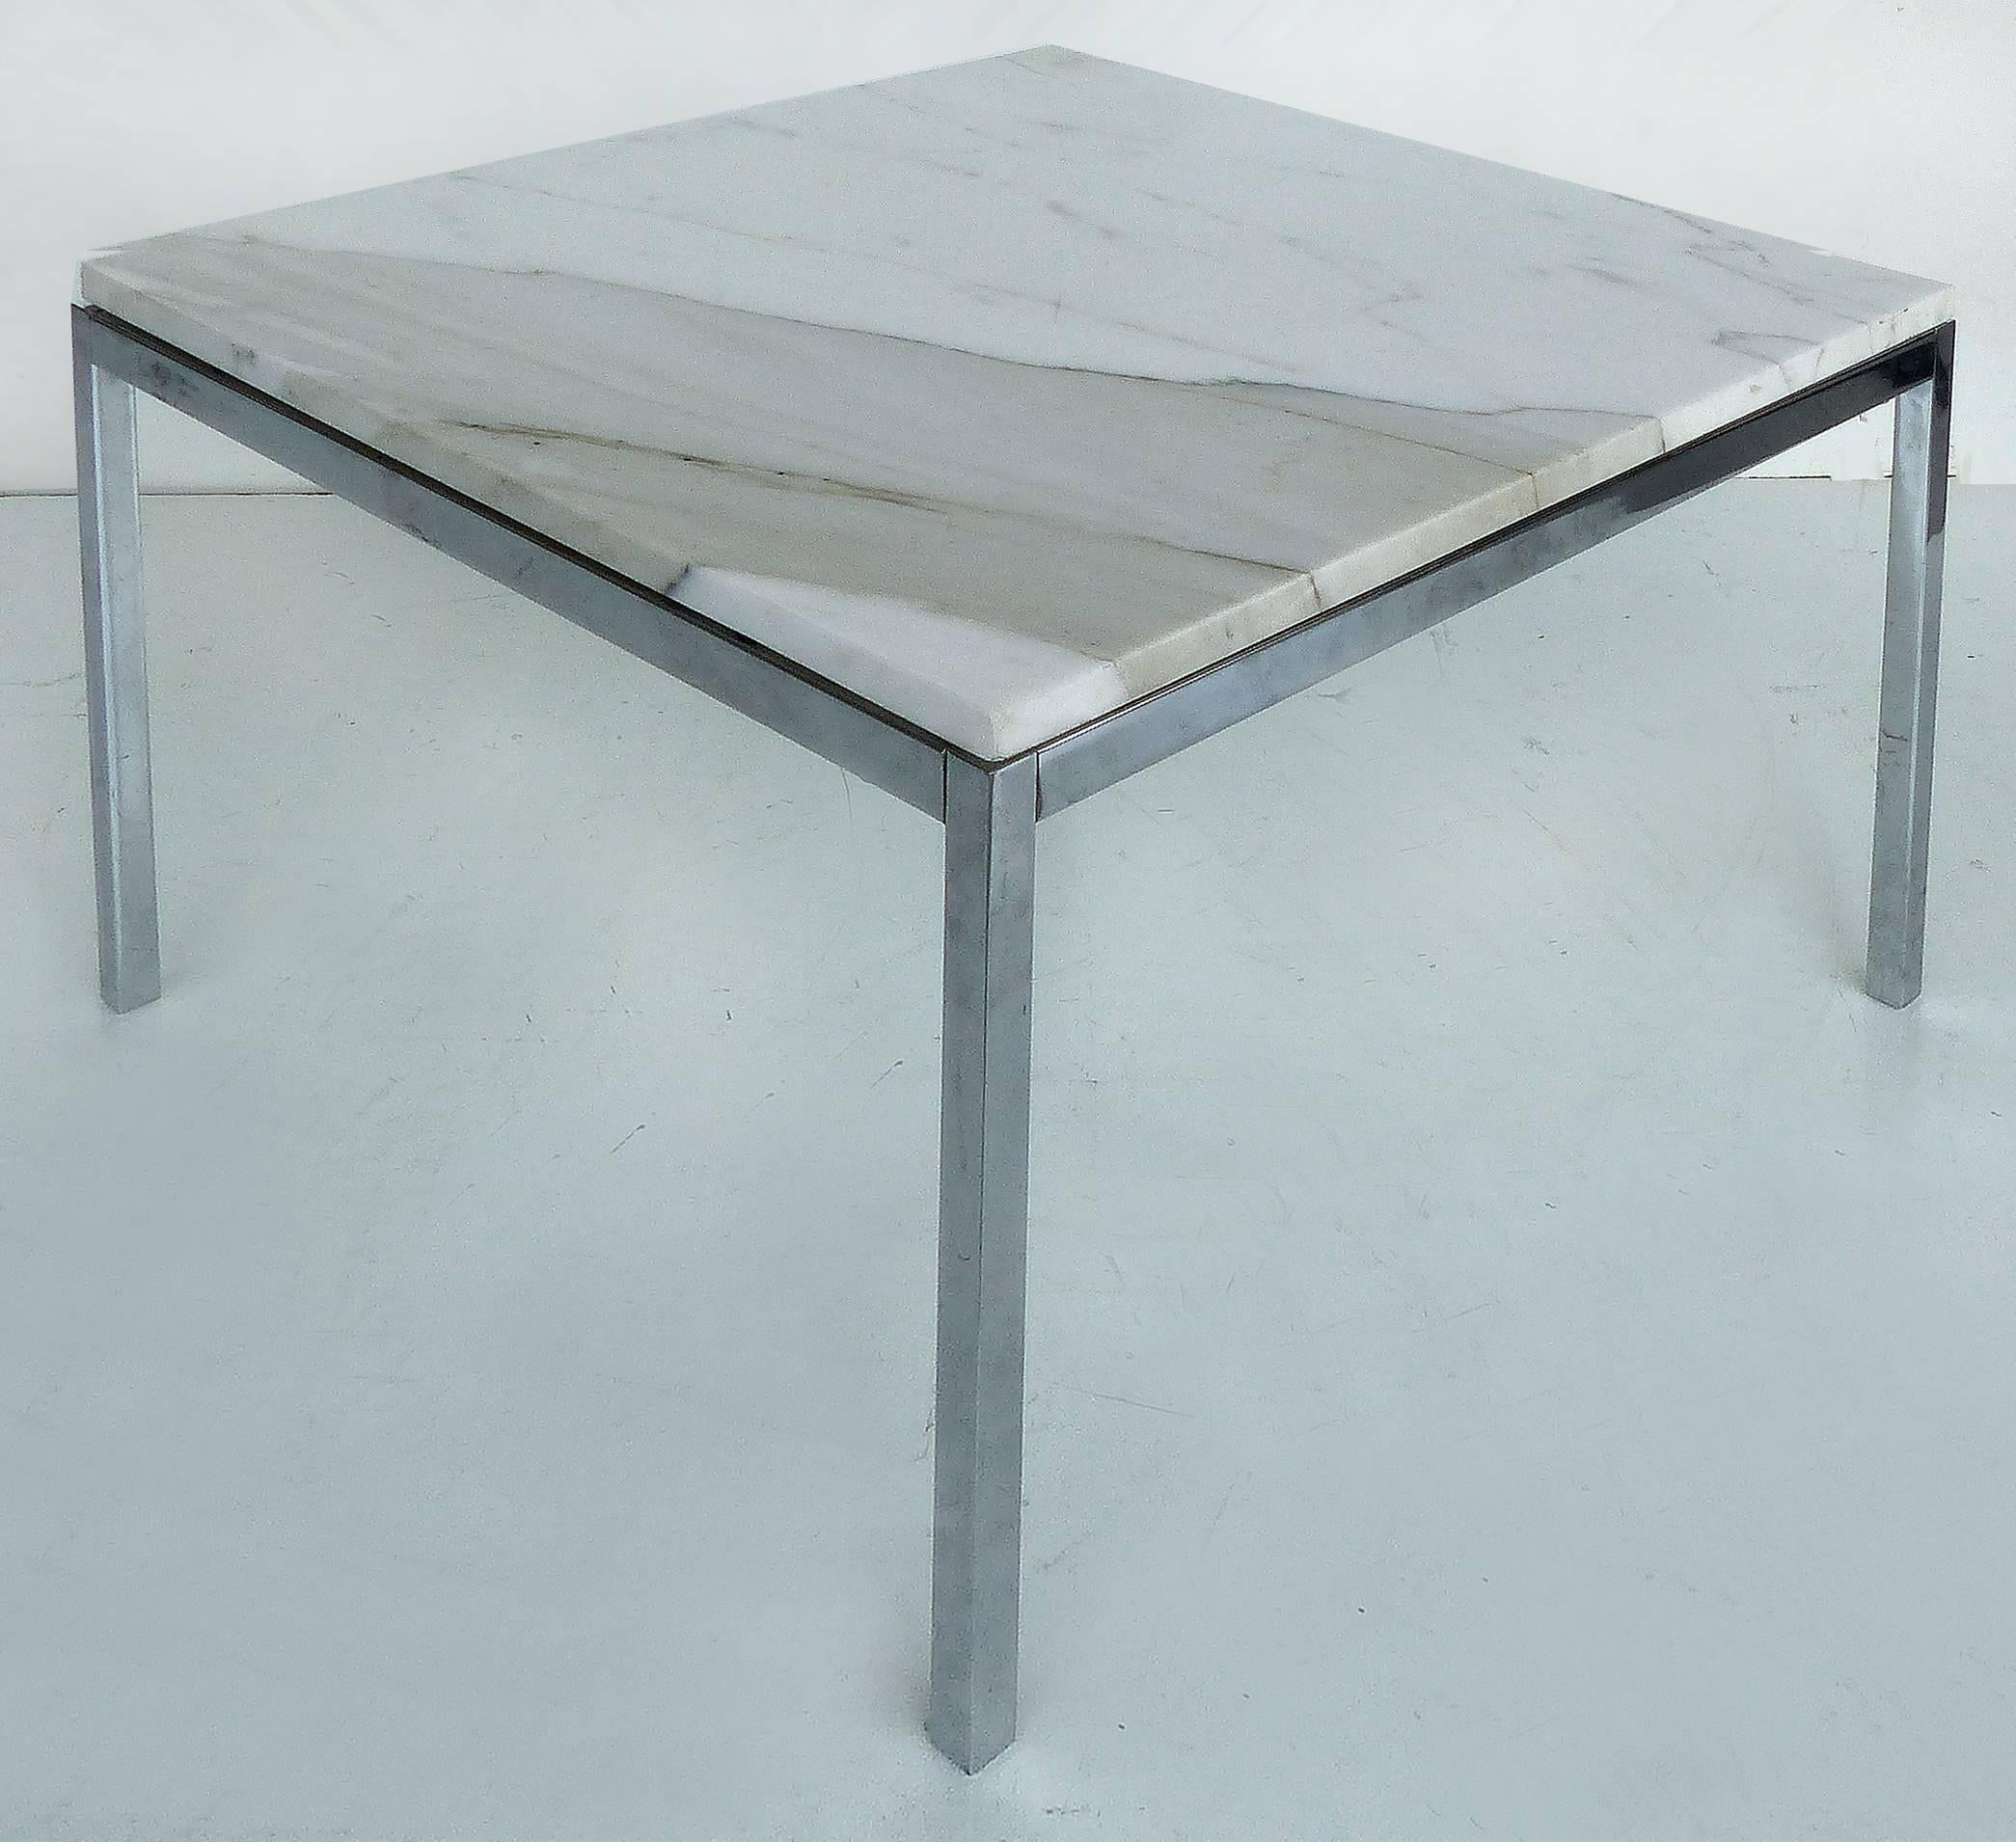 Offered is a stainless steel and calacatta marble side table stamped Knoll Studio and signed Florence Knoll on one of the legs. A simple iconic design by Knoll.